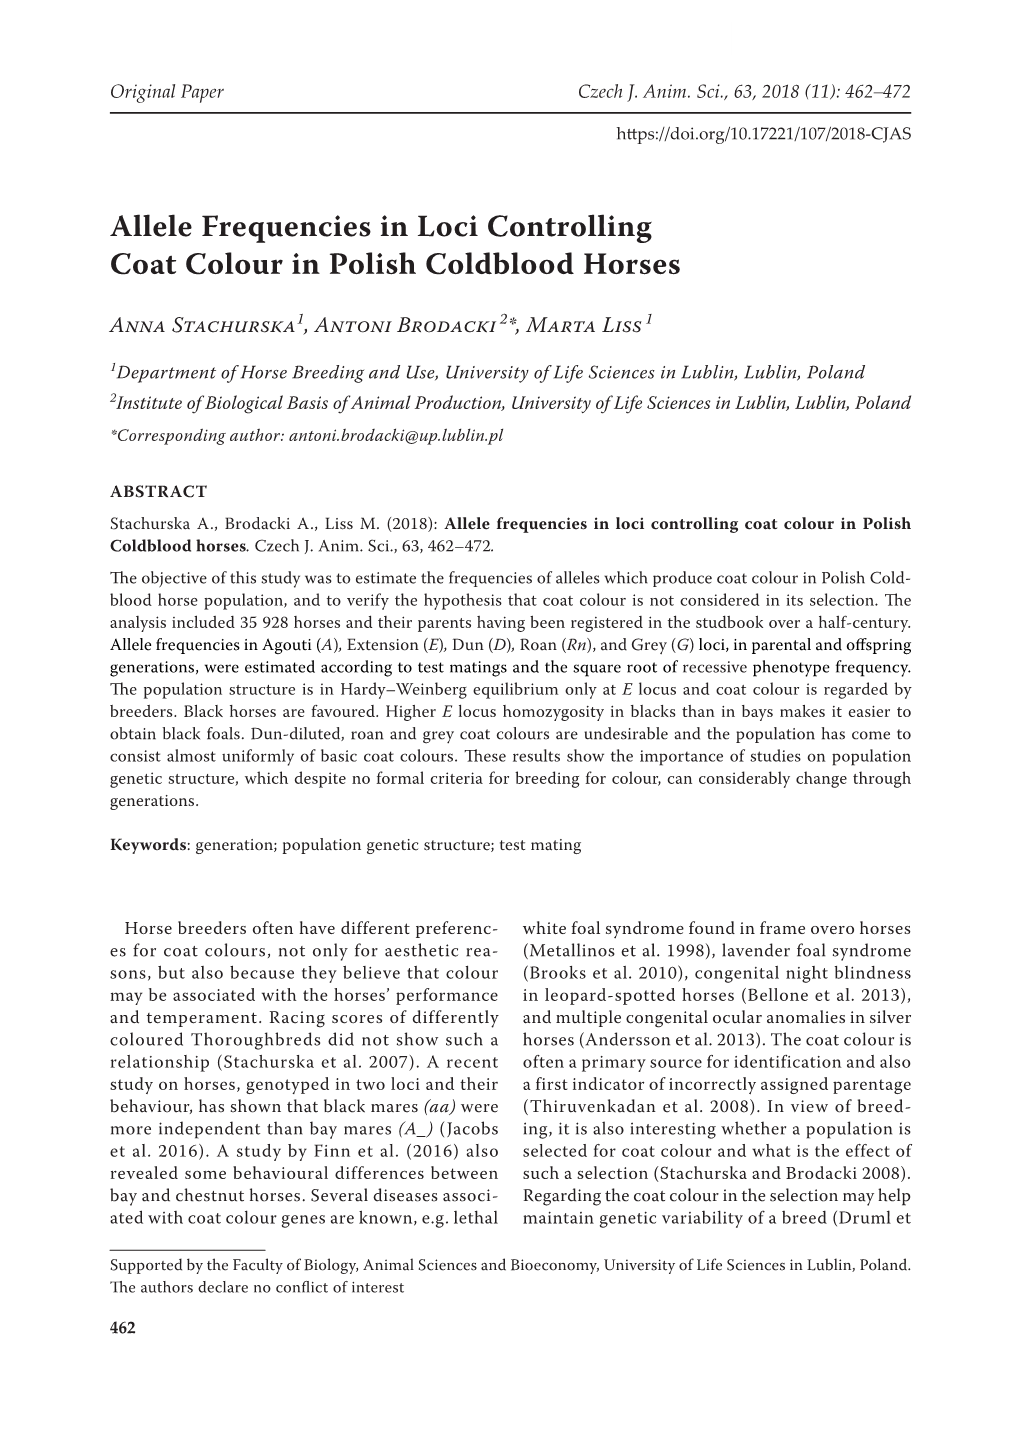 Allele Frequencies in Loci Controlling Coat Colour in Polish Coldblood Horses